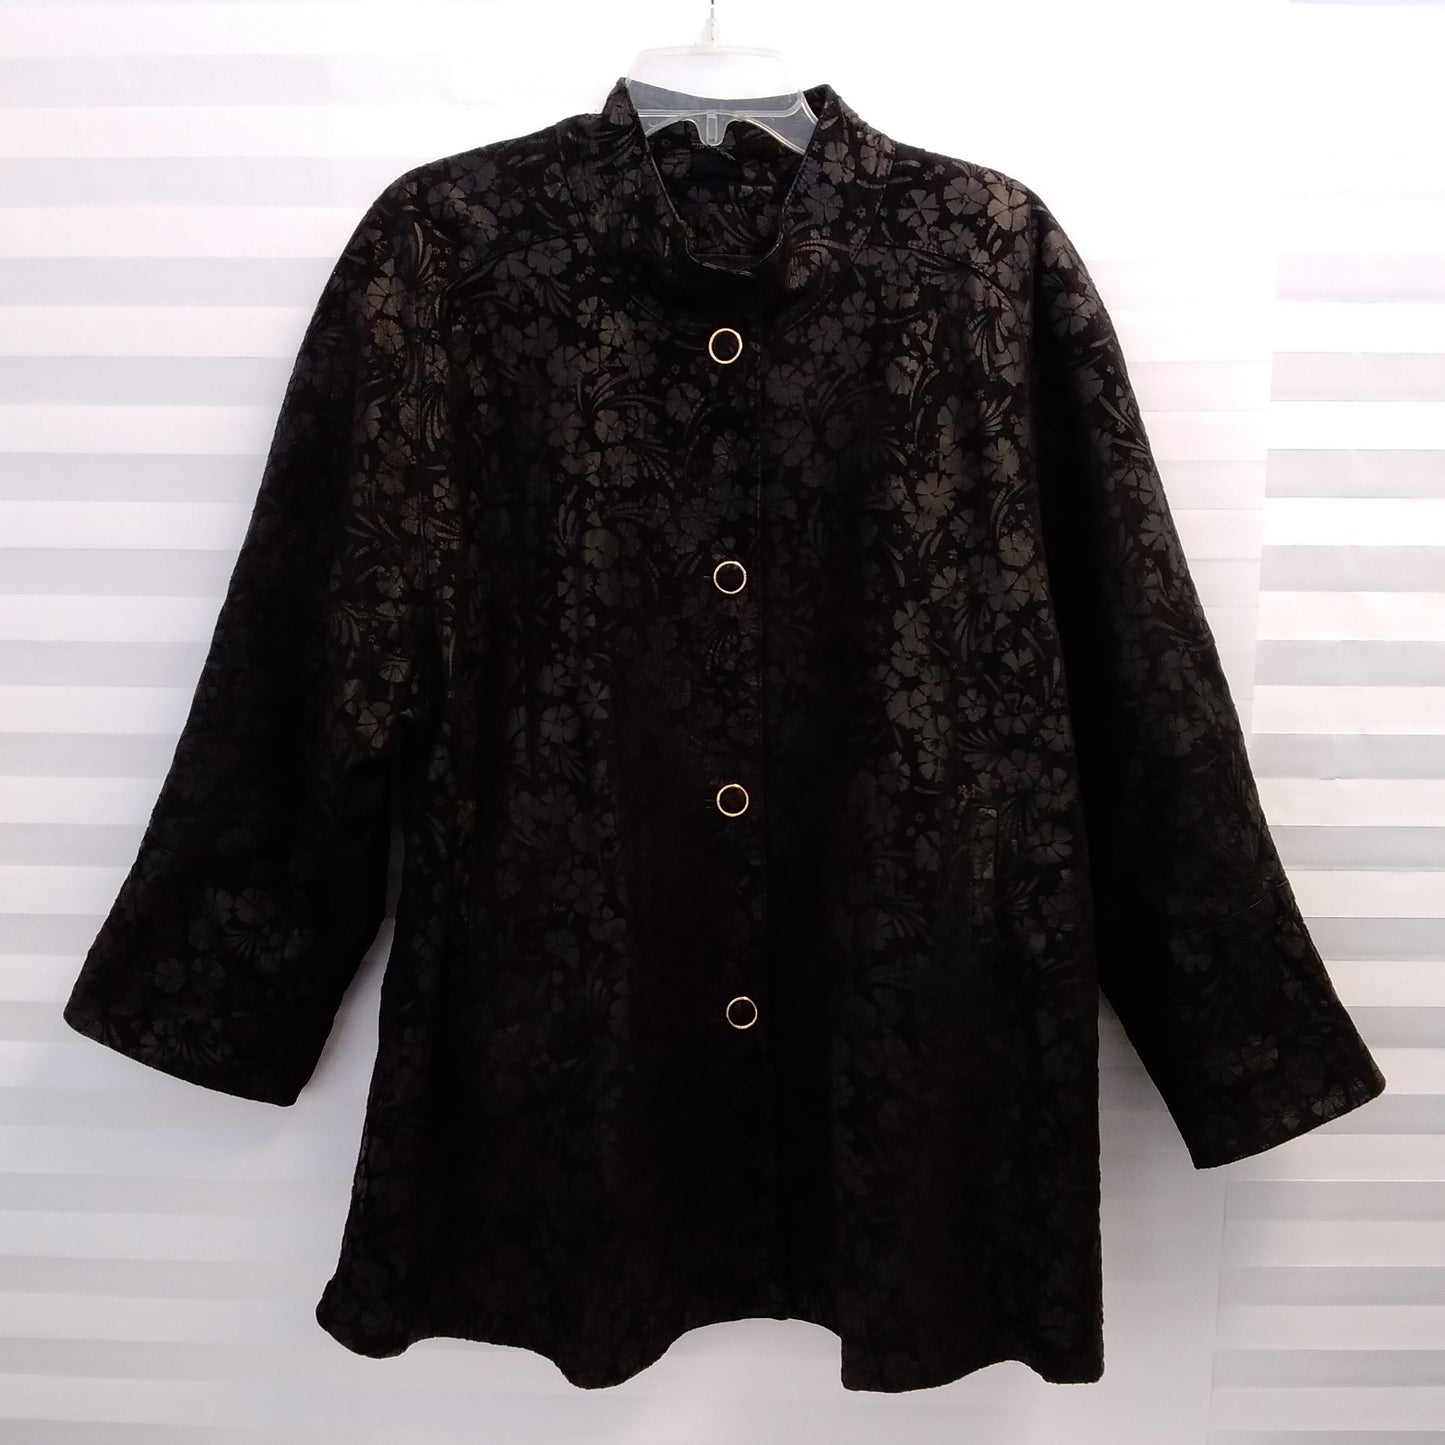 Bally Women's Black Suede Leather Floral Button Front Jacket - Size: 38 (US 6)